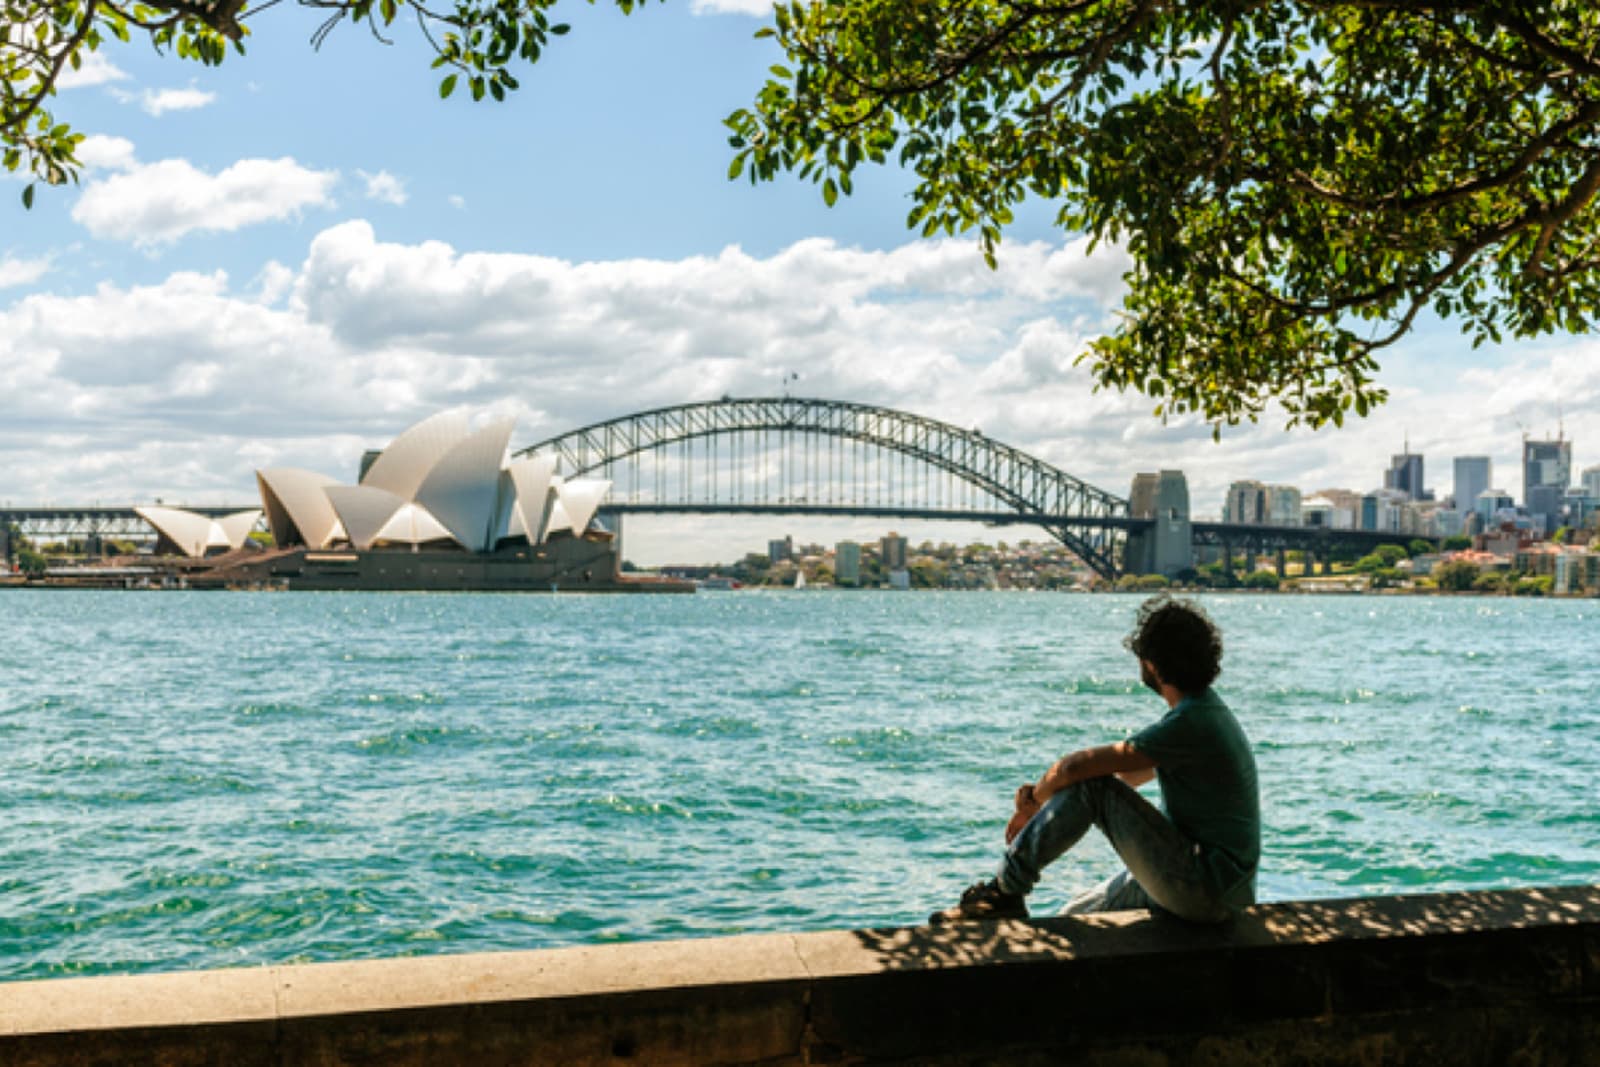 A traveller taking in a view of the Sydney Harbour